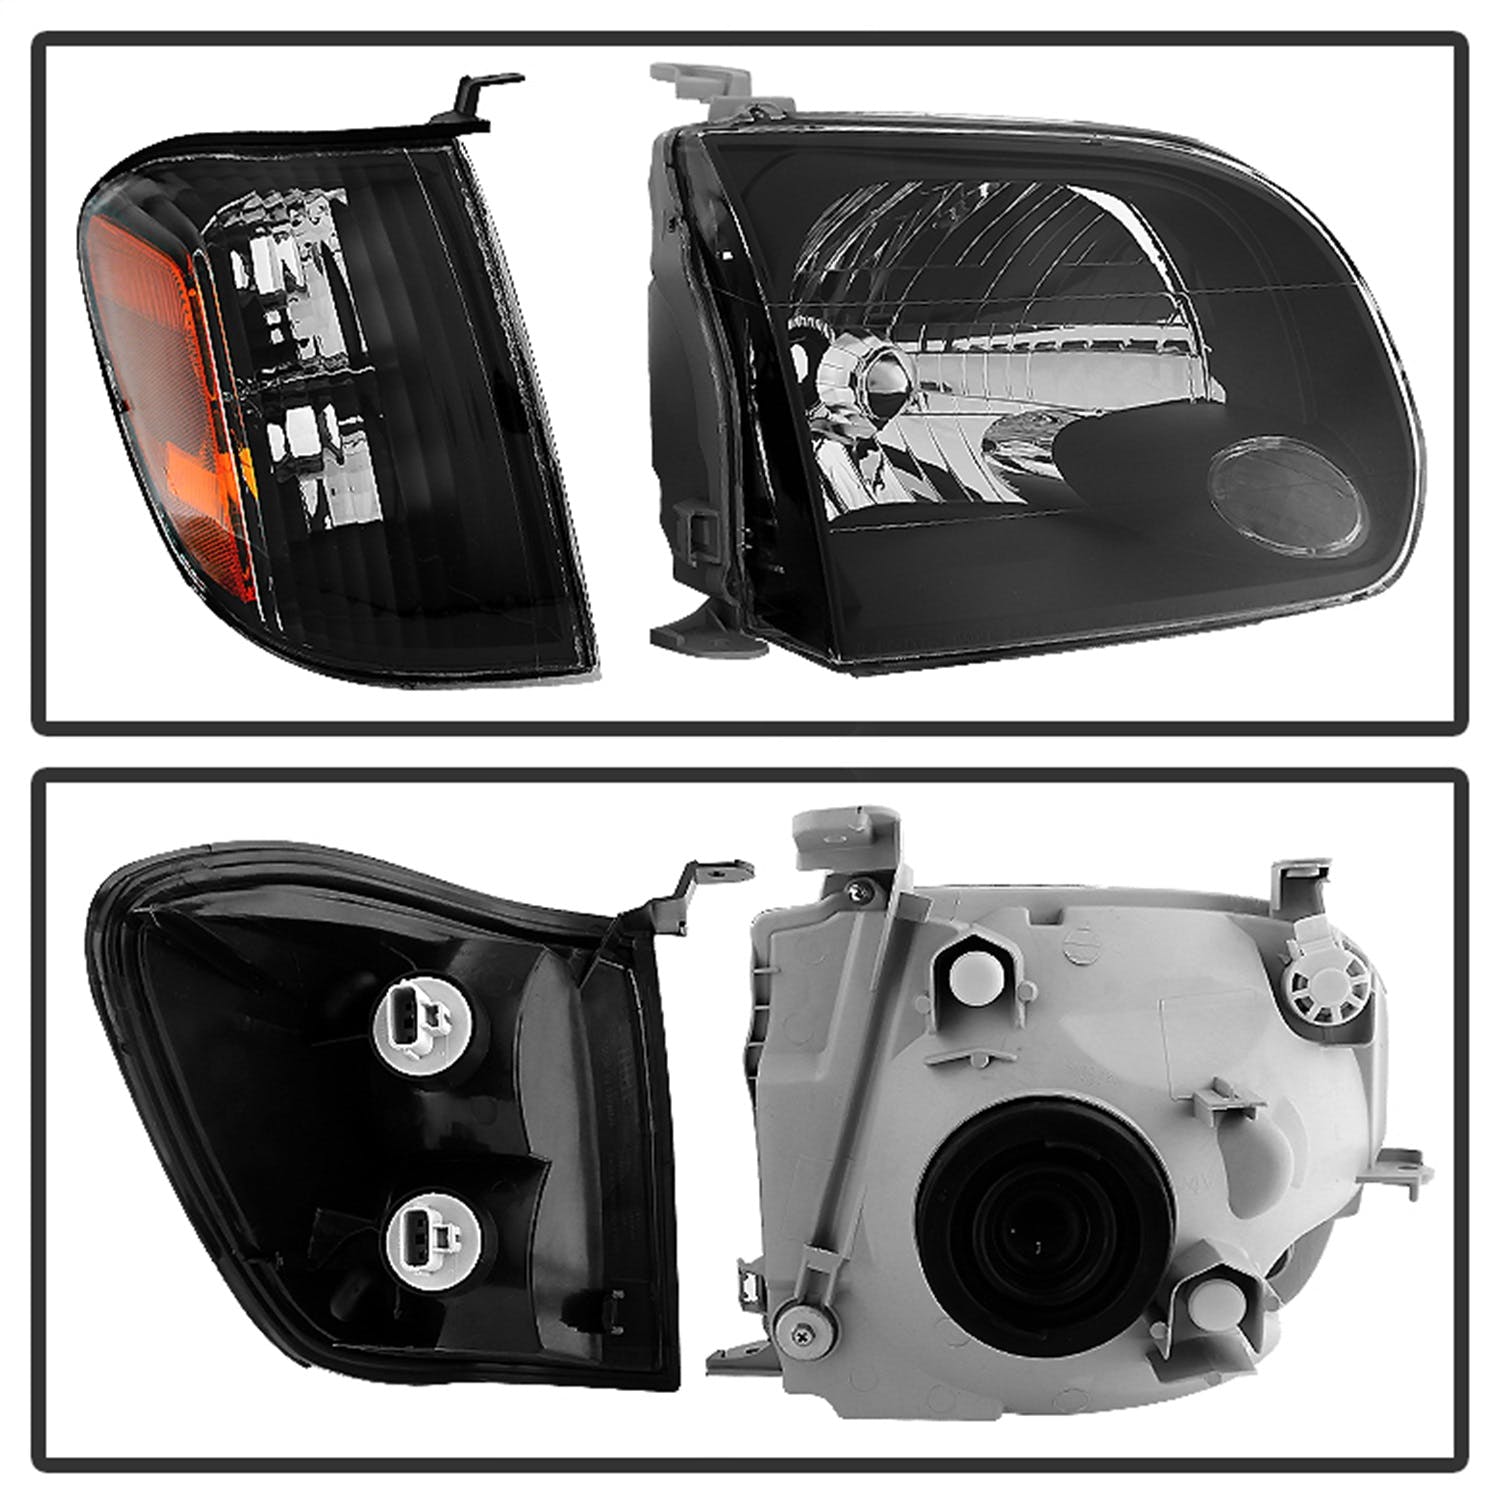 XTUNE POWER 9034336 Toyota Tundra Double Cab 4 Door Only 05 06 Sequoia 05 07 OEM Style Headlights and Corner Lights Black